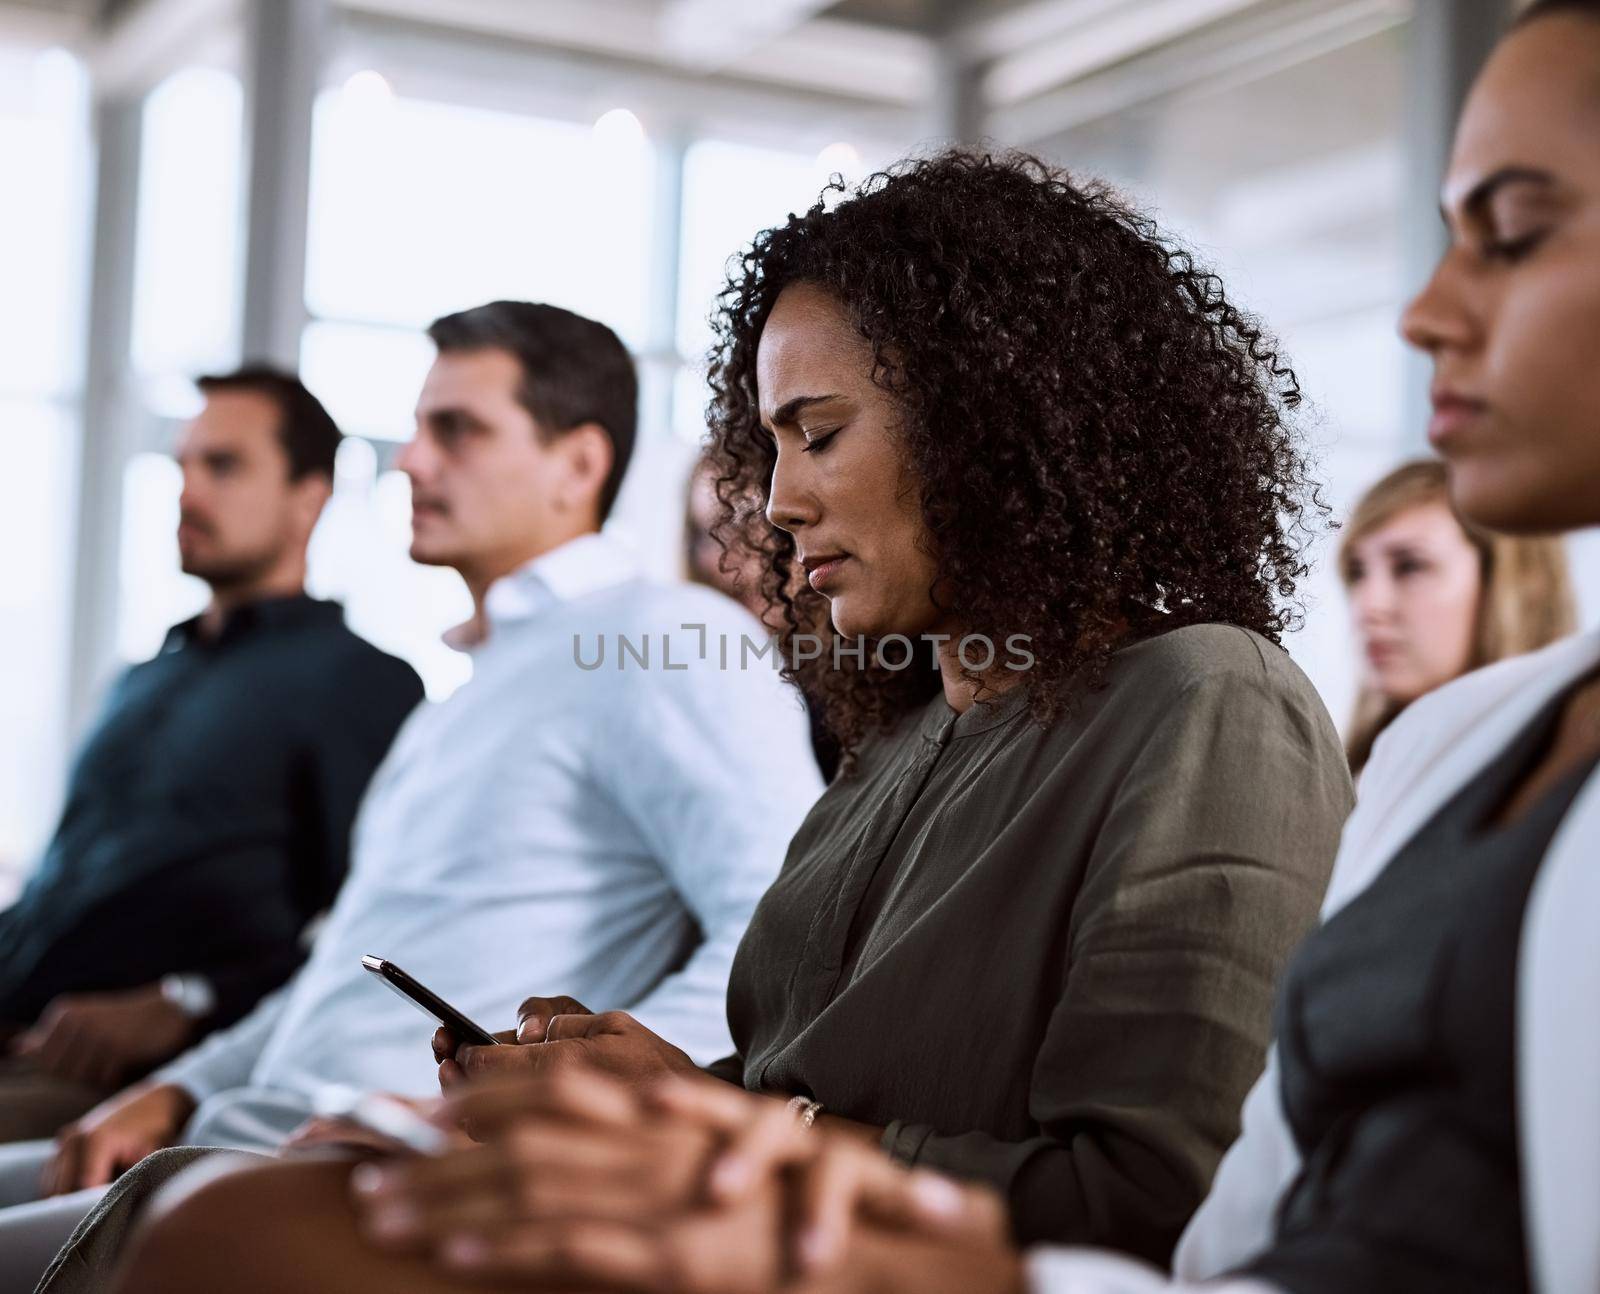 Shot of a businesswoman using her mobile phone during a conference.